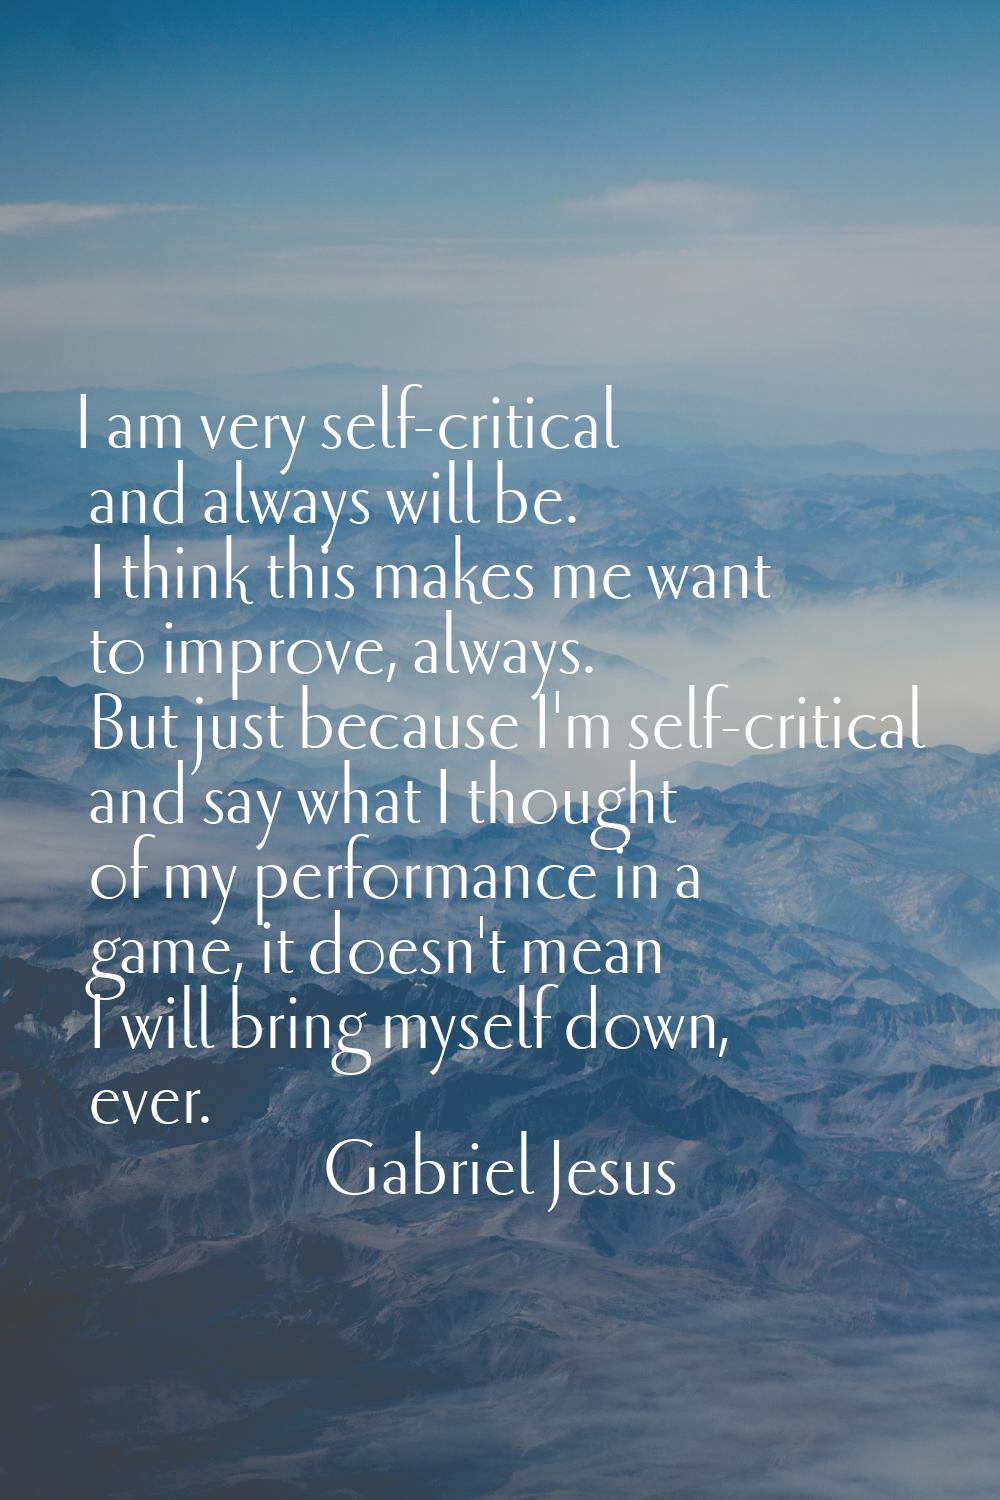 I am very self-critical and always will be. I think this makes me want to improve, always. But just